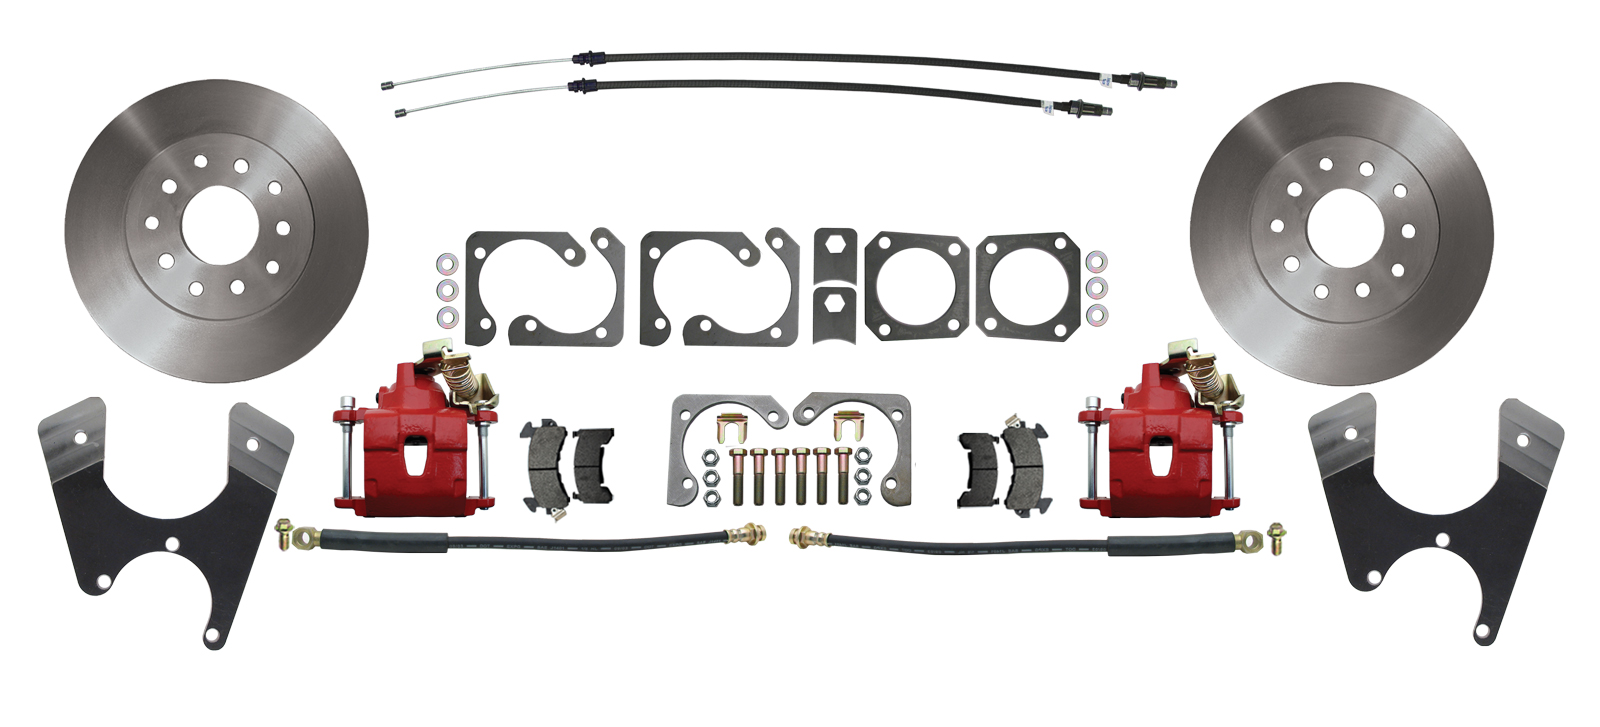  GM F, X Body 10/12 Bolt Pattern Standard Rear Disc Brake Kit With E-Brake & Powder Coated Red Calipers Staggered Shocks